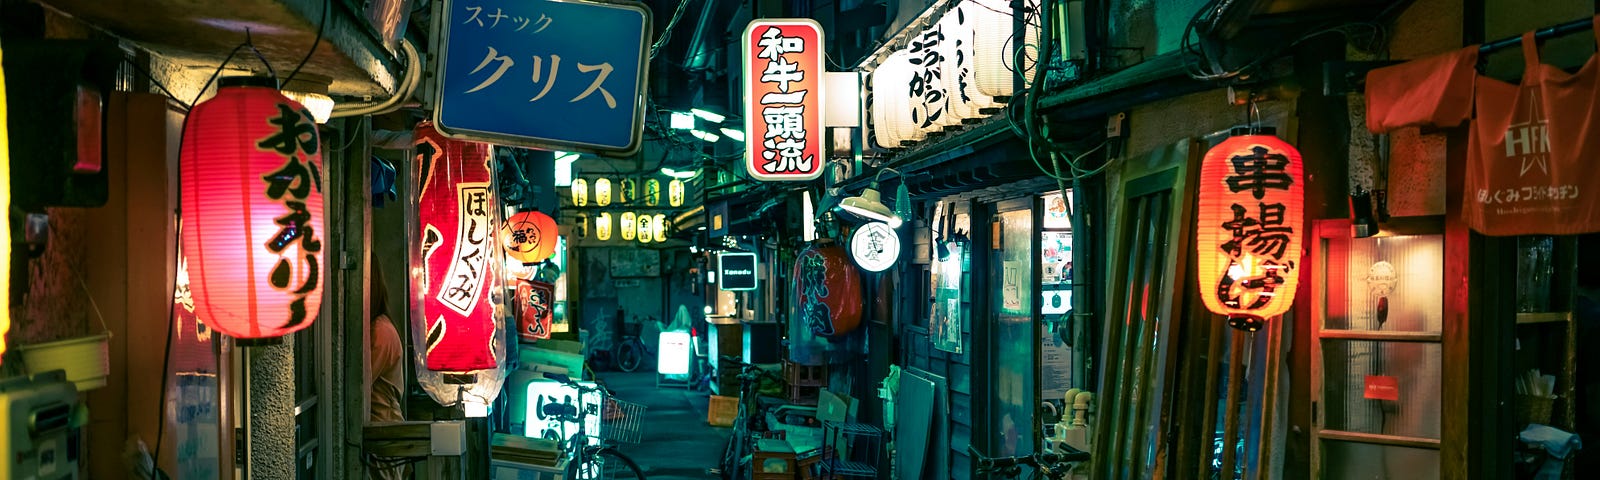 A Japanese alley full of restaurants and shops at night. The street is full of lanterns and neon lights.